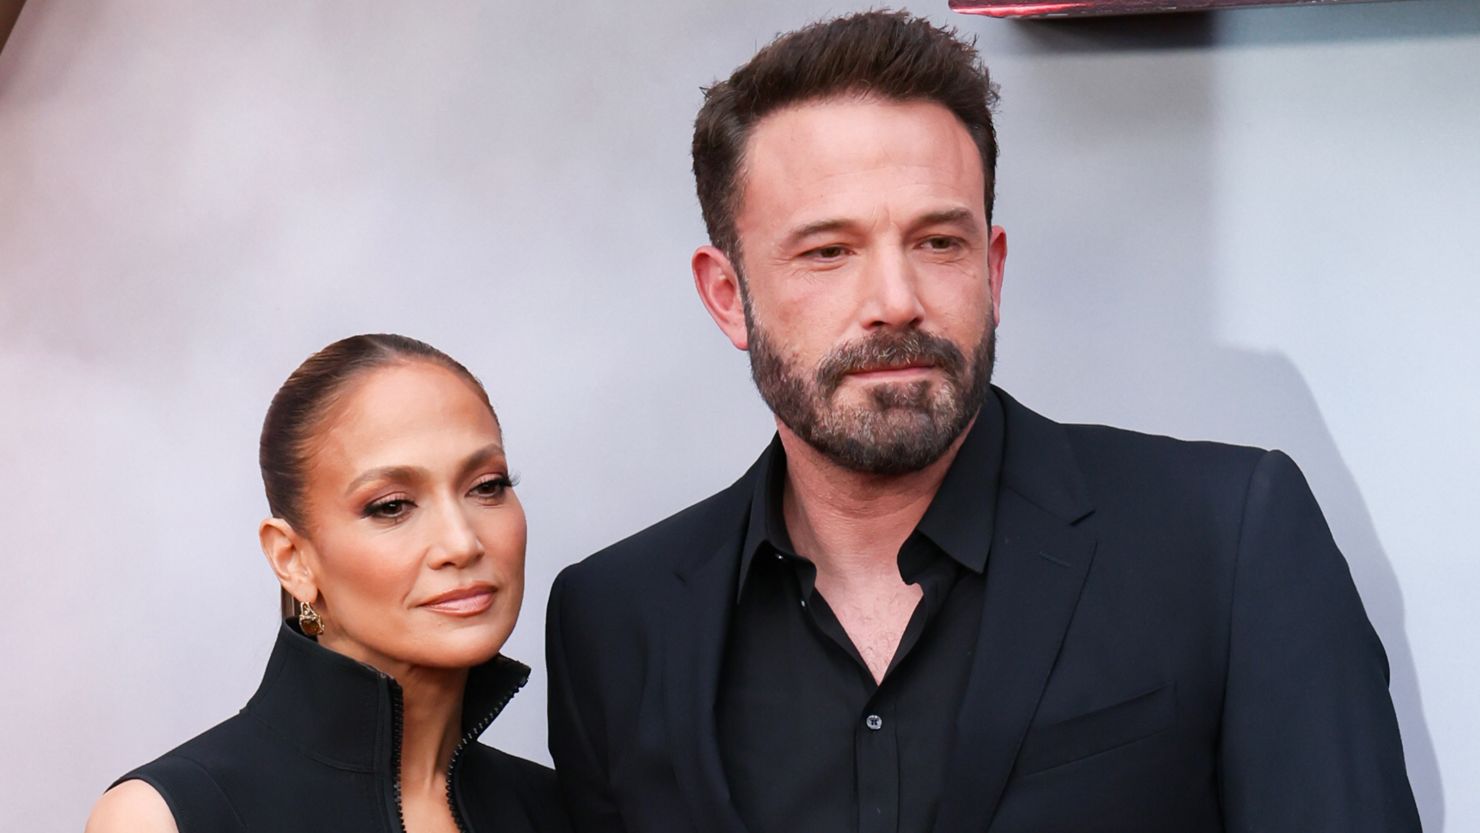 Jennifer Lopez and Ben Affleck attend the Los Angeles premiere of Warner Bros. "The Flash" at Ovation Hollywood on June 12, 2023 in Hollywood, California.